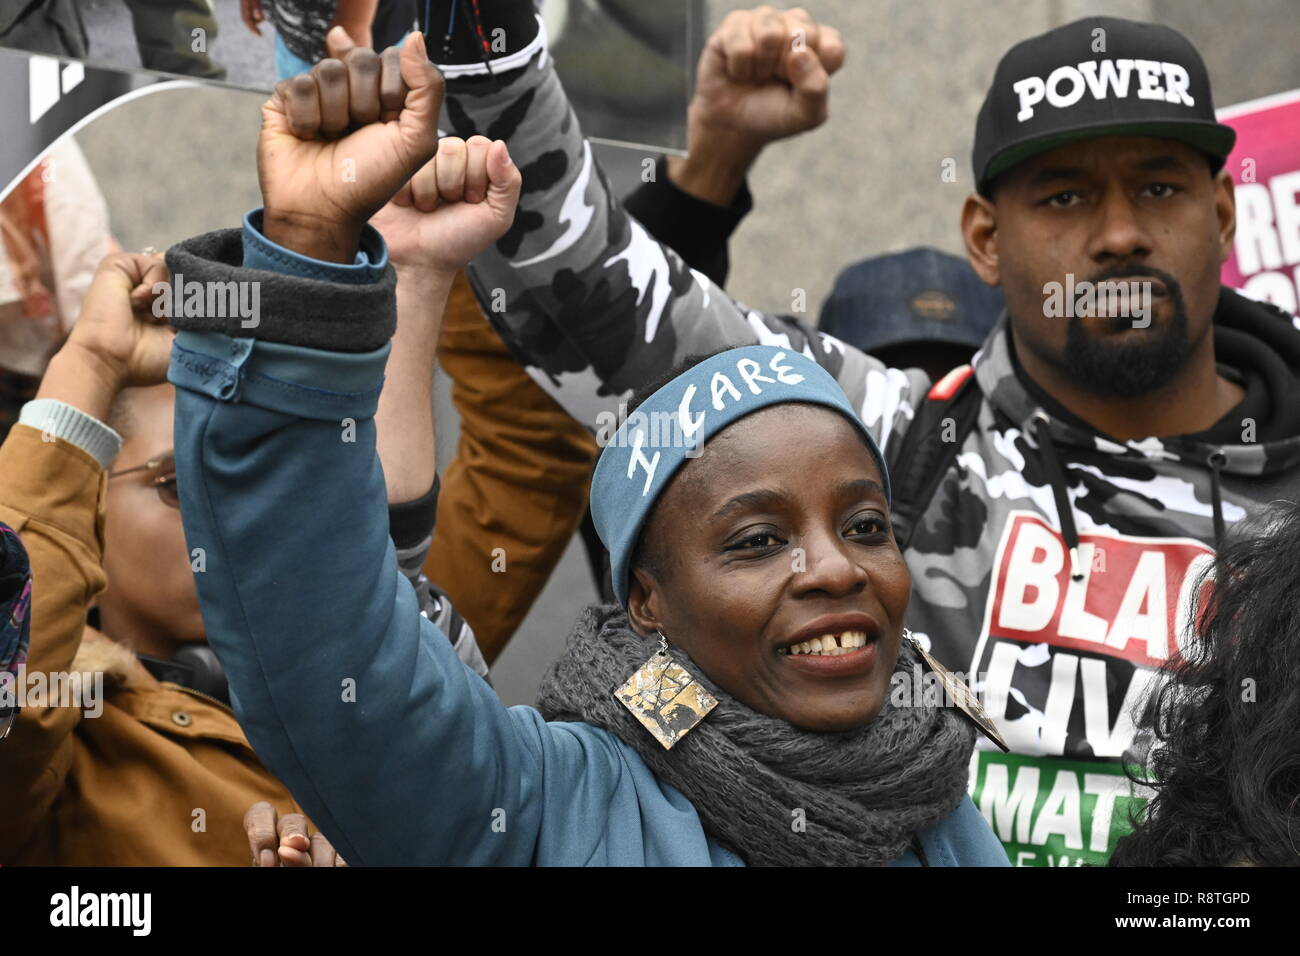 New York, USA. 17th Dec, 2018. New York, U.S., 17 December 2018 Statue of Liberty climber Patricia Okoumou and supporters raise their fists outside federal court following her conviction by a federal magistrate judge on misdemeanor charges of trespassing, disorderly conduct, and interfering with the functioning of government for her act of civil disobedience on July 4. Okoumou climbed the base of the statue to protest against Trump administration immigration policies. She is to be sentenced on March 5, 2019. Credit: Joseph Reid/Alamy Live News Stock Photo